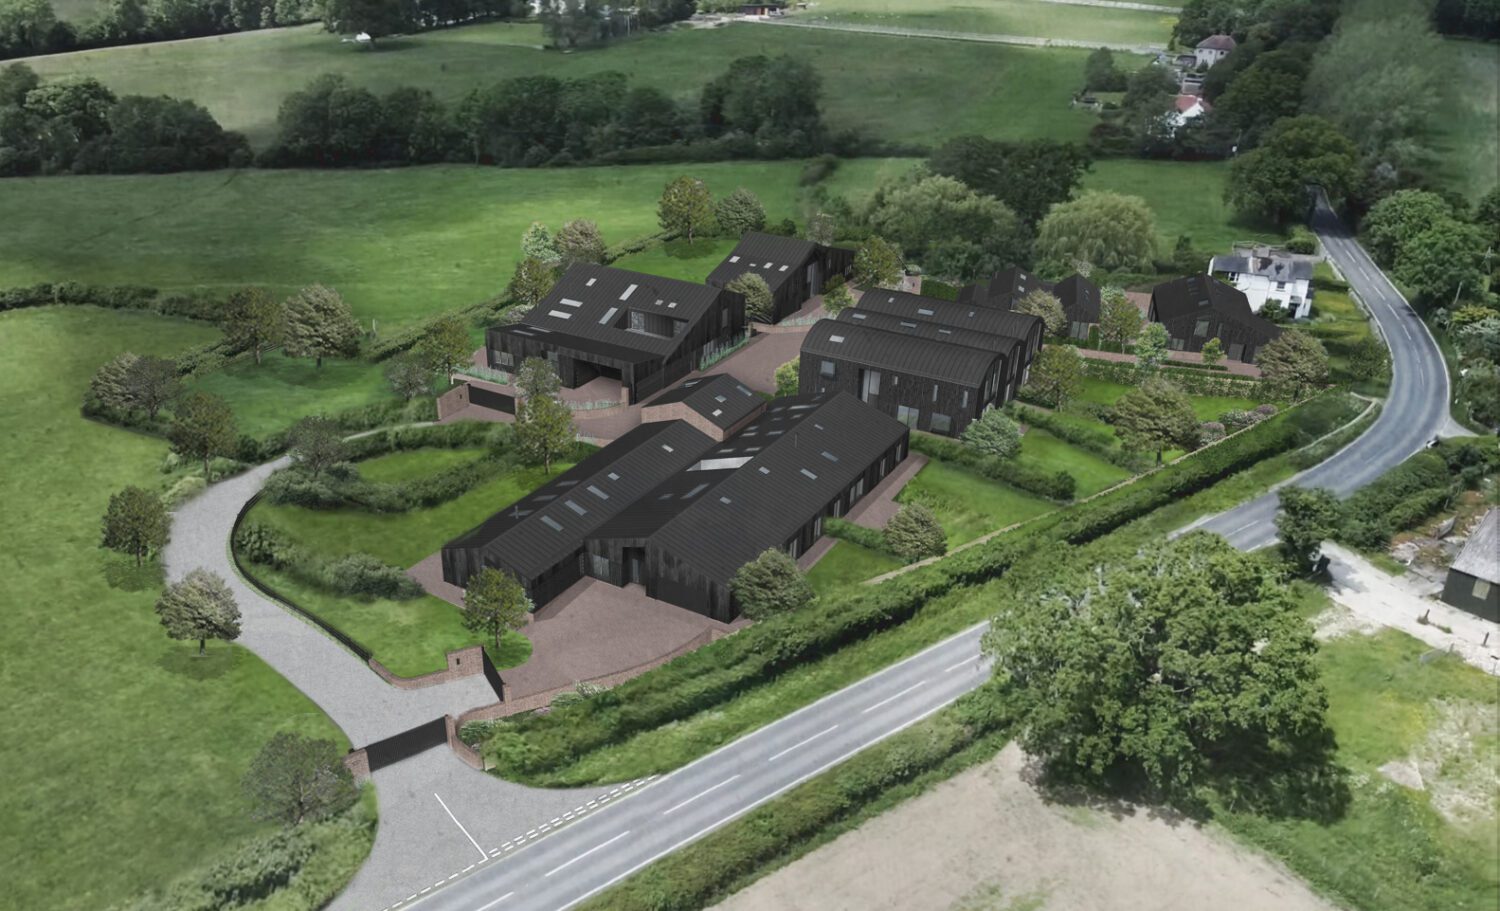 Former Kent dairy farm to be transformed into 9 new super energy efficient, net zero carbon, architectural homes